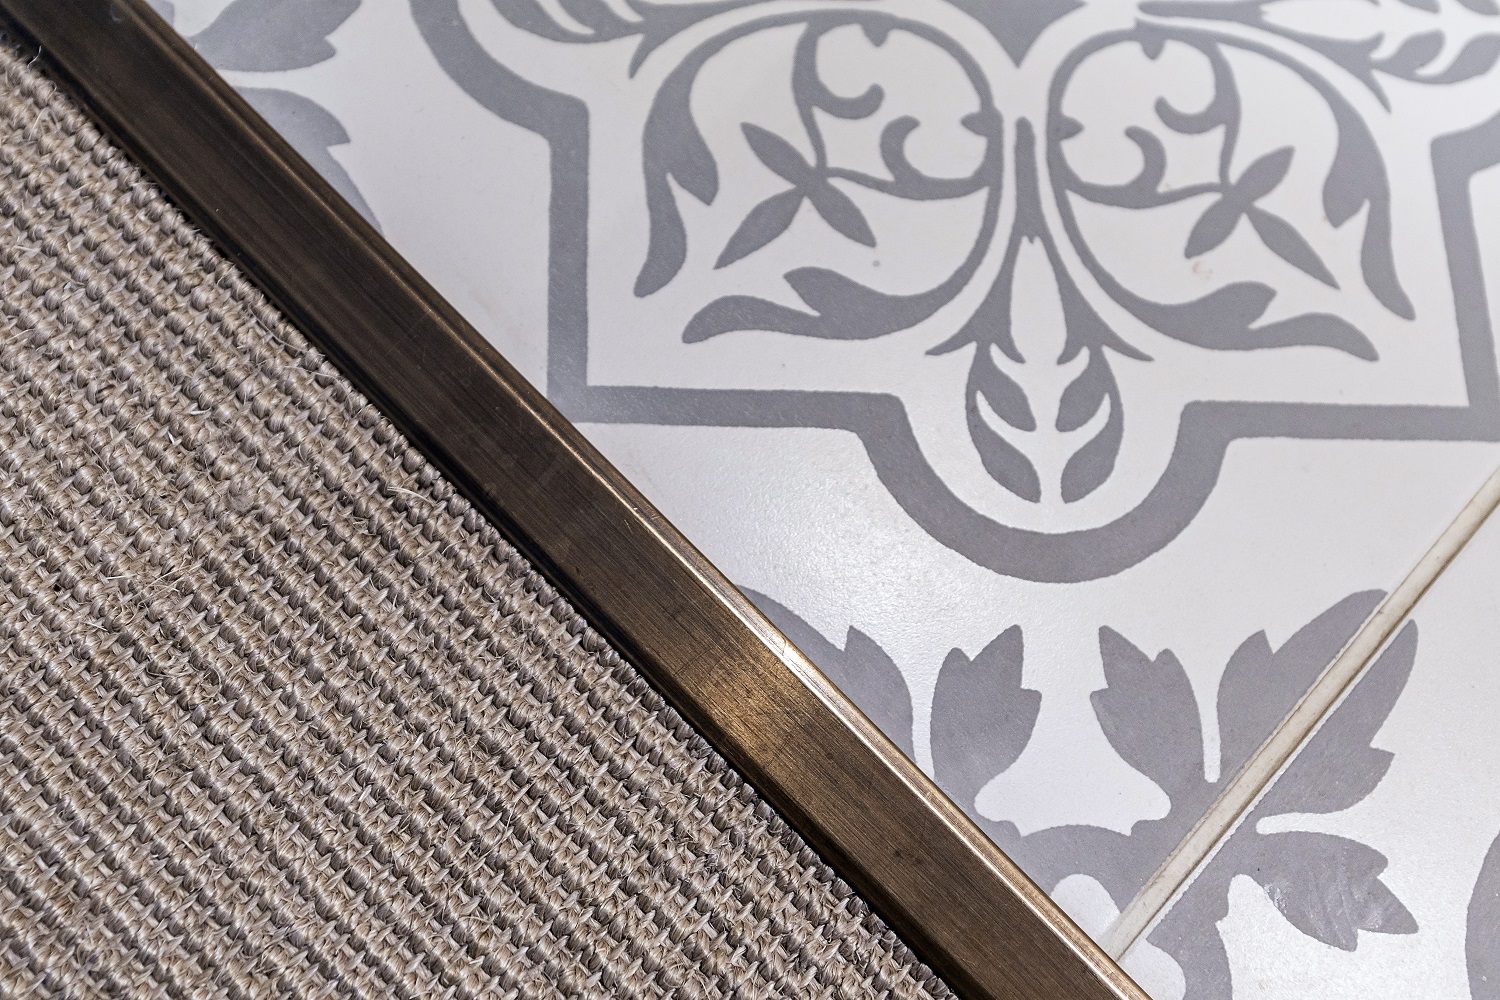 Close up of textures of rug on patterned tiles